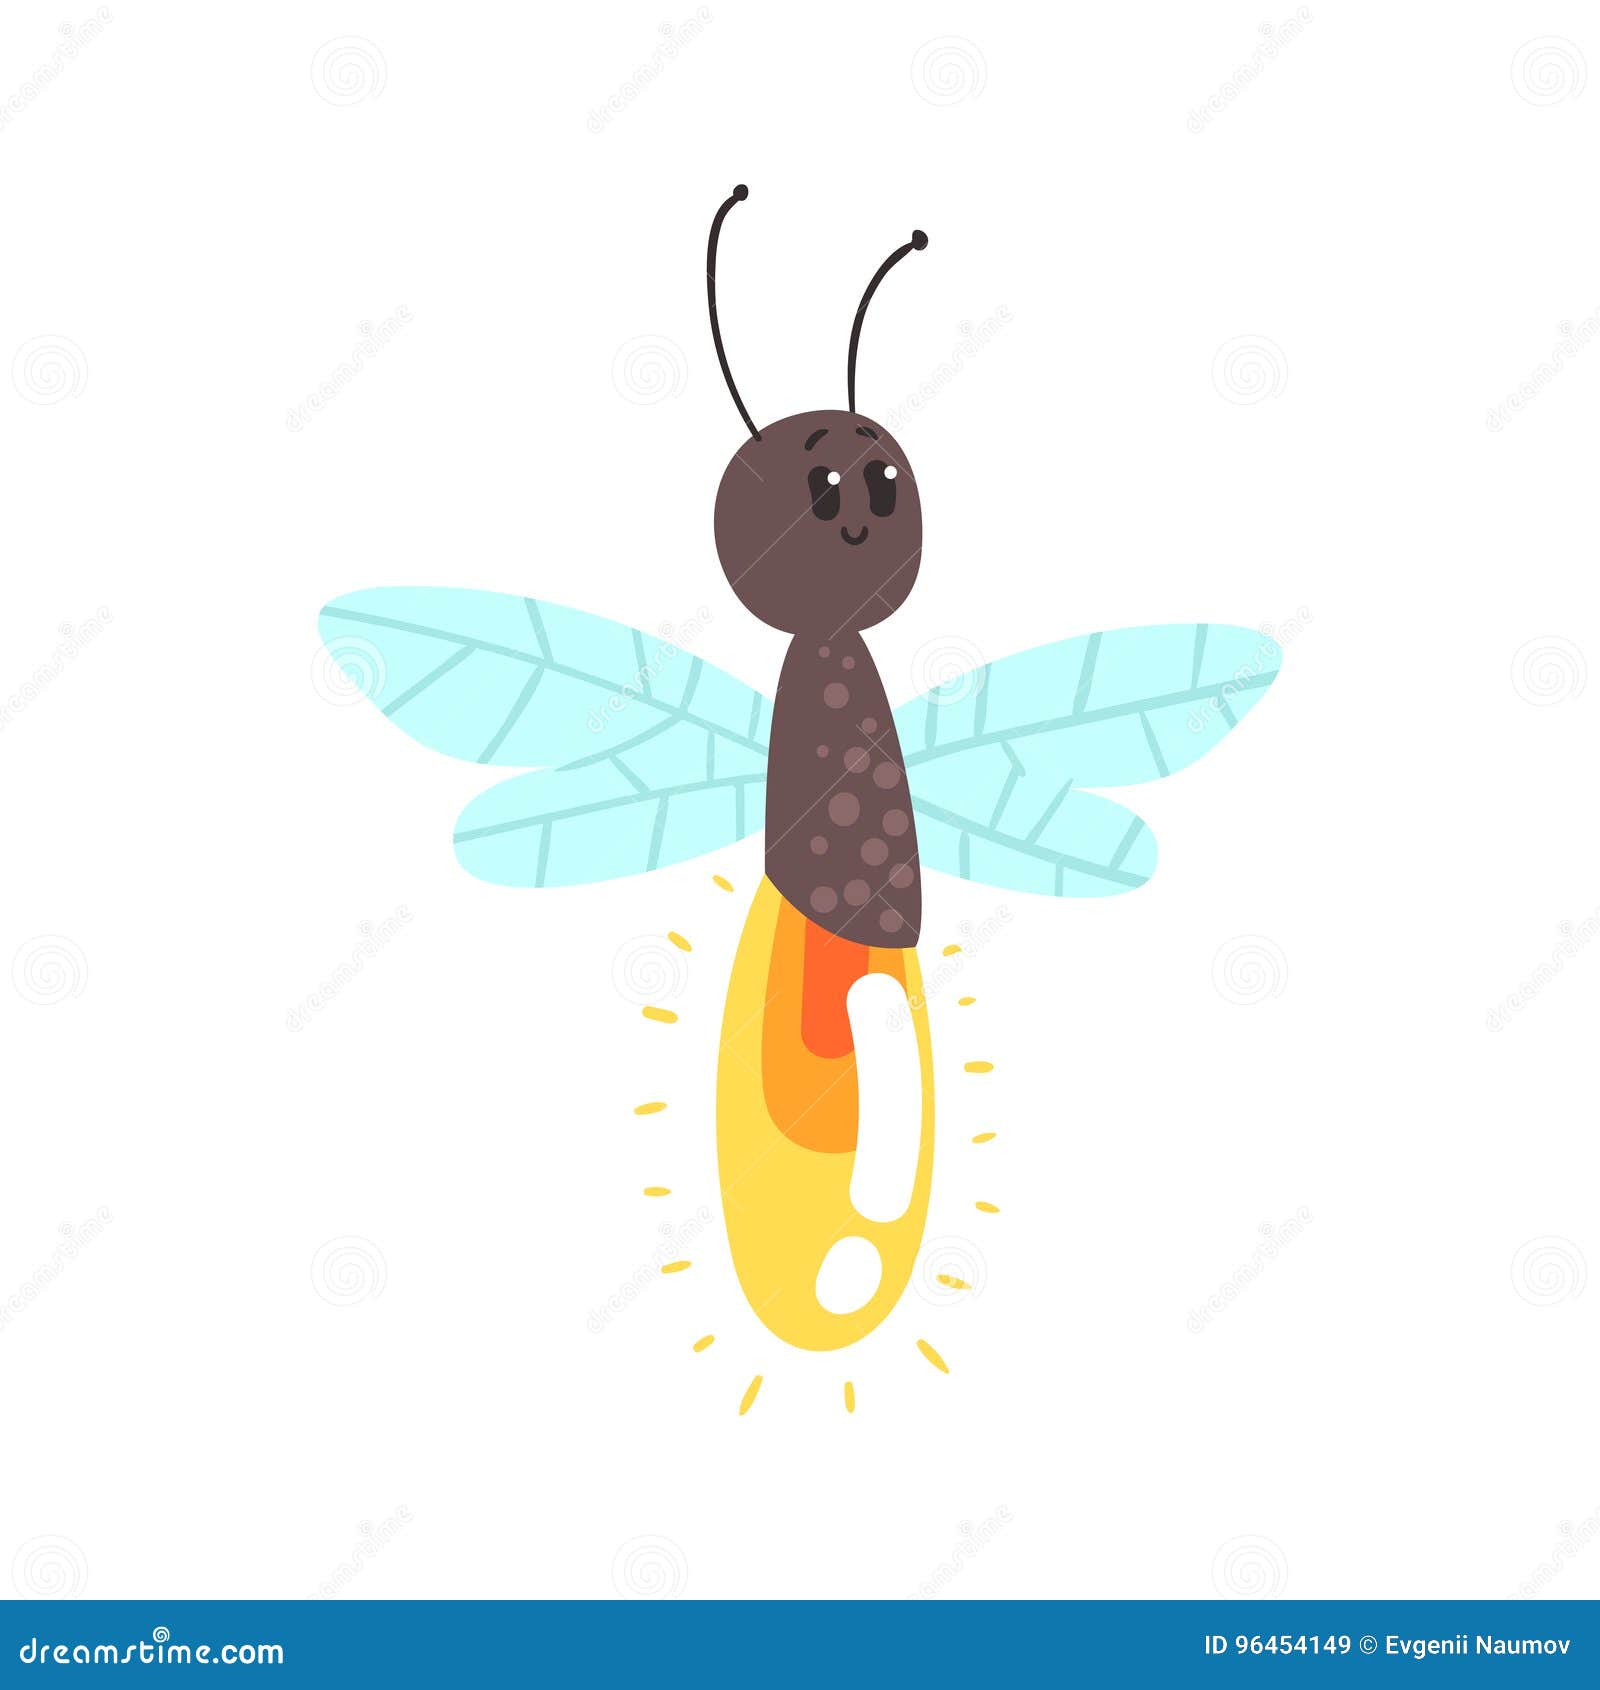 Firefly Cartoons, Illustrations & Vector Stock Images - 3400 Pictures